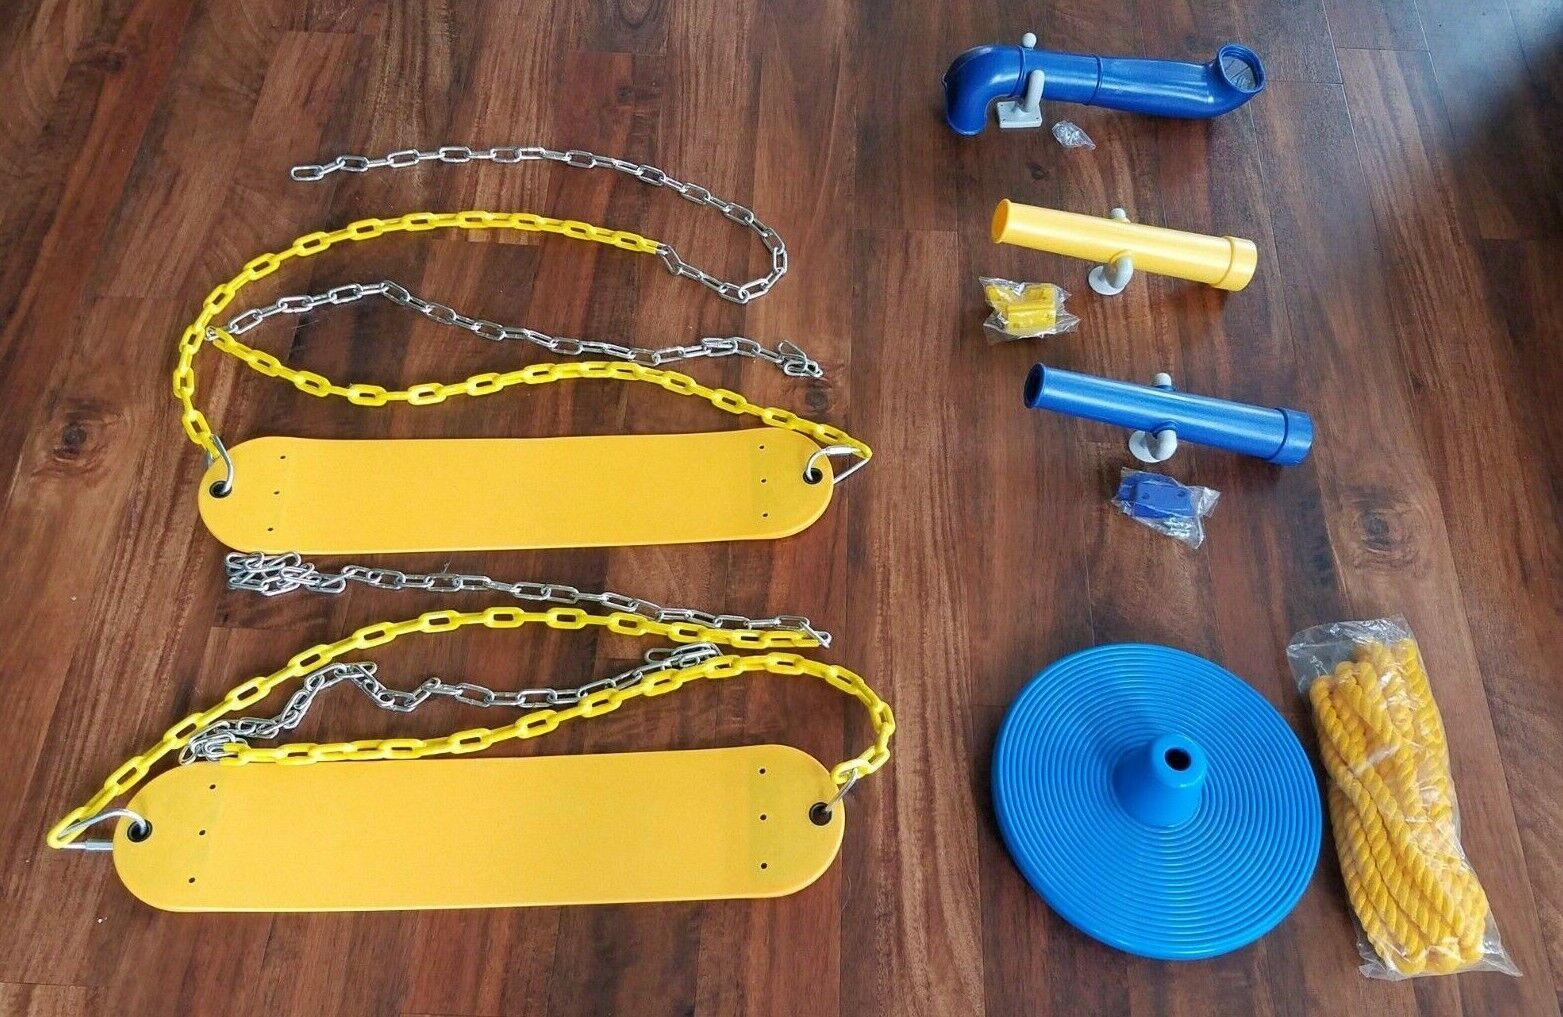  NEW Swingset Swing Yellow and Blue Playground Playset Accessories Lot Unbranded